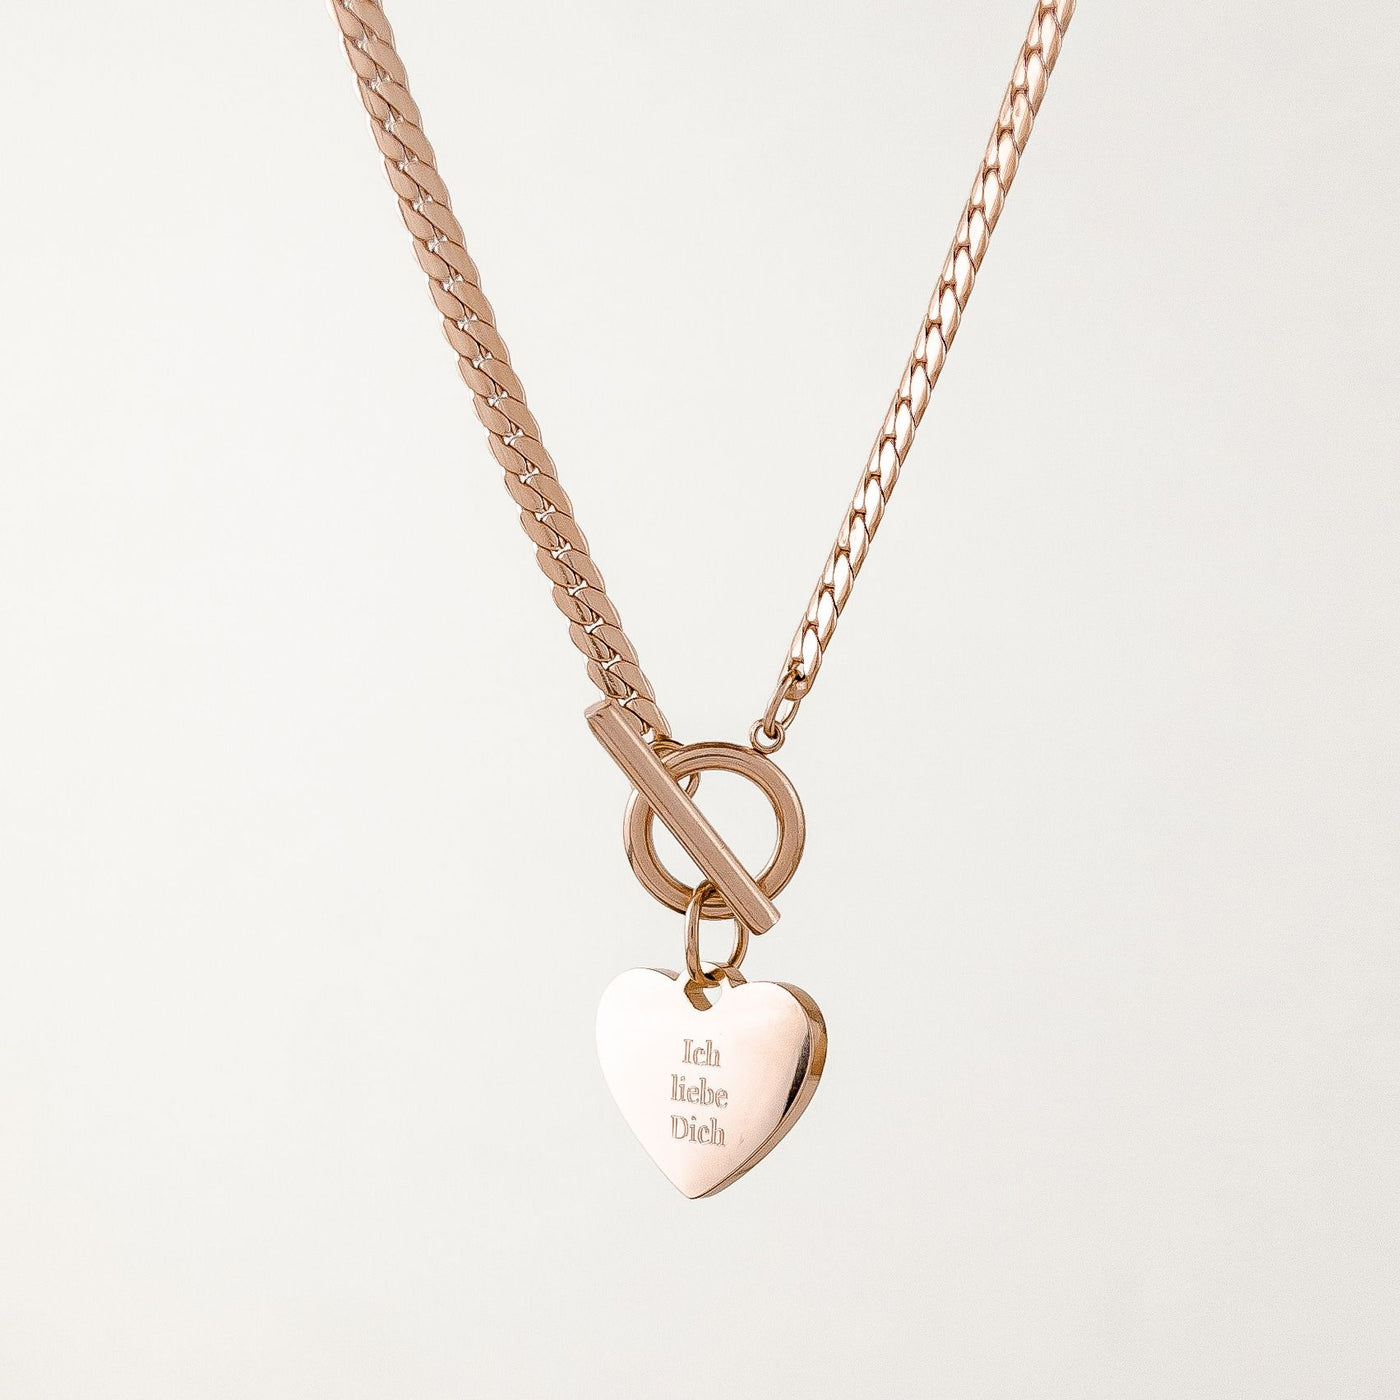 Personalised T Bar Necklace Gold Or Silver By Florence London |  notonthehighstreet.com